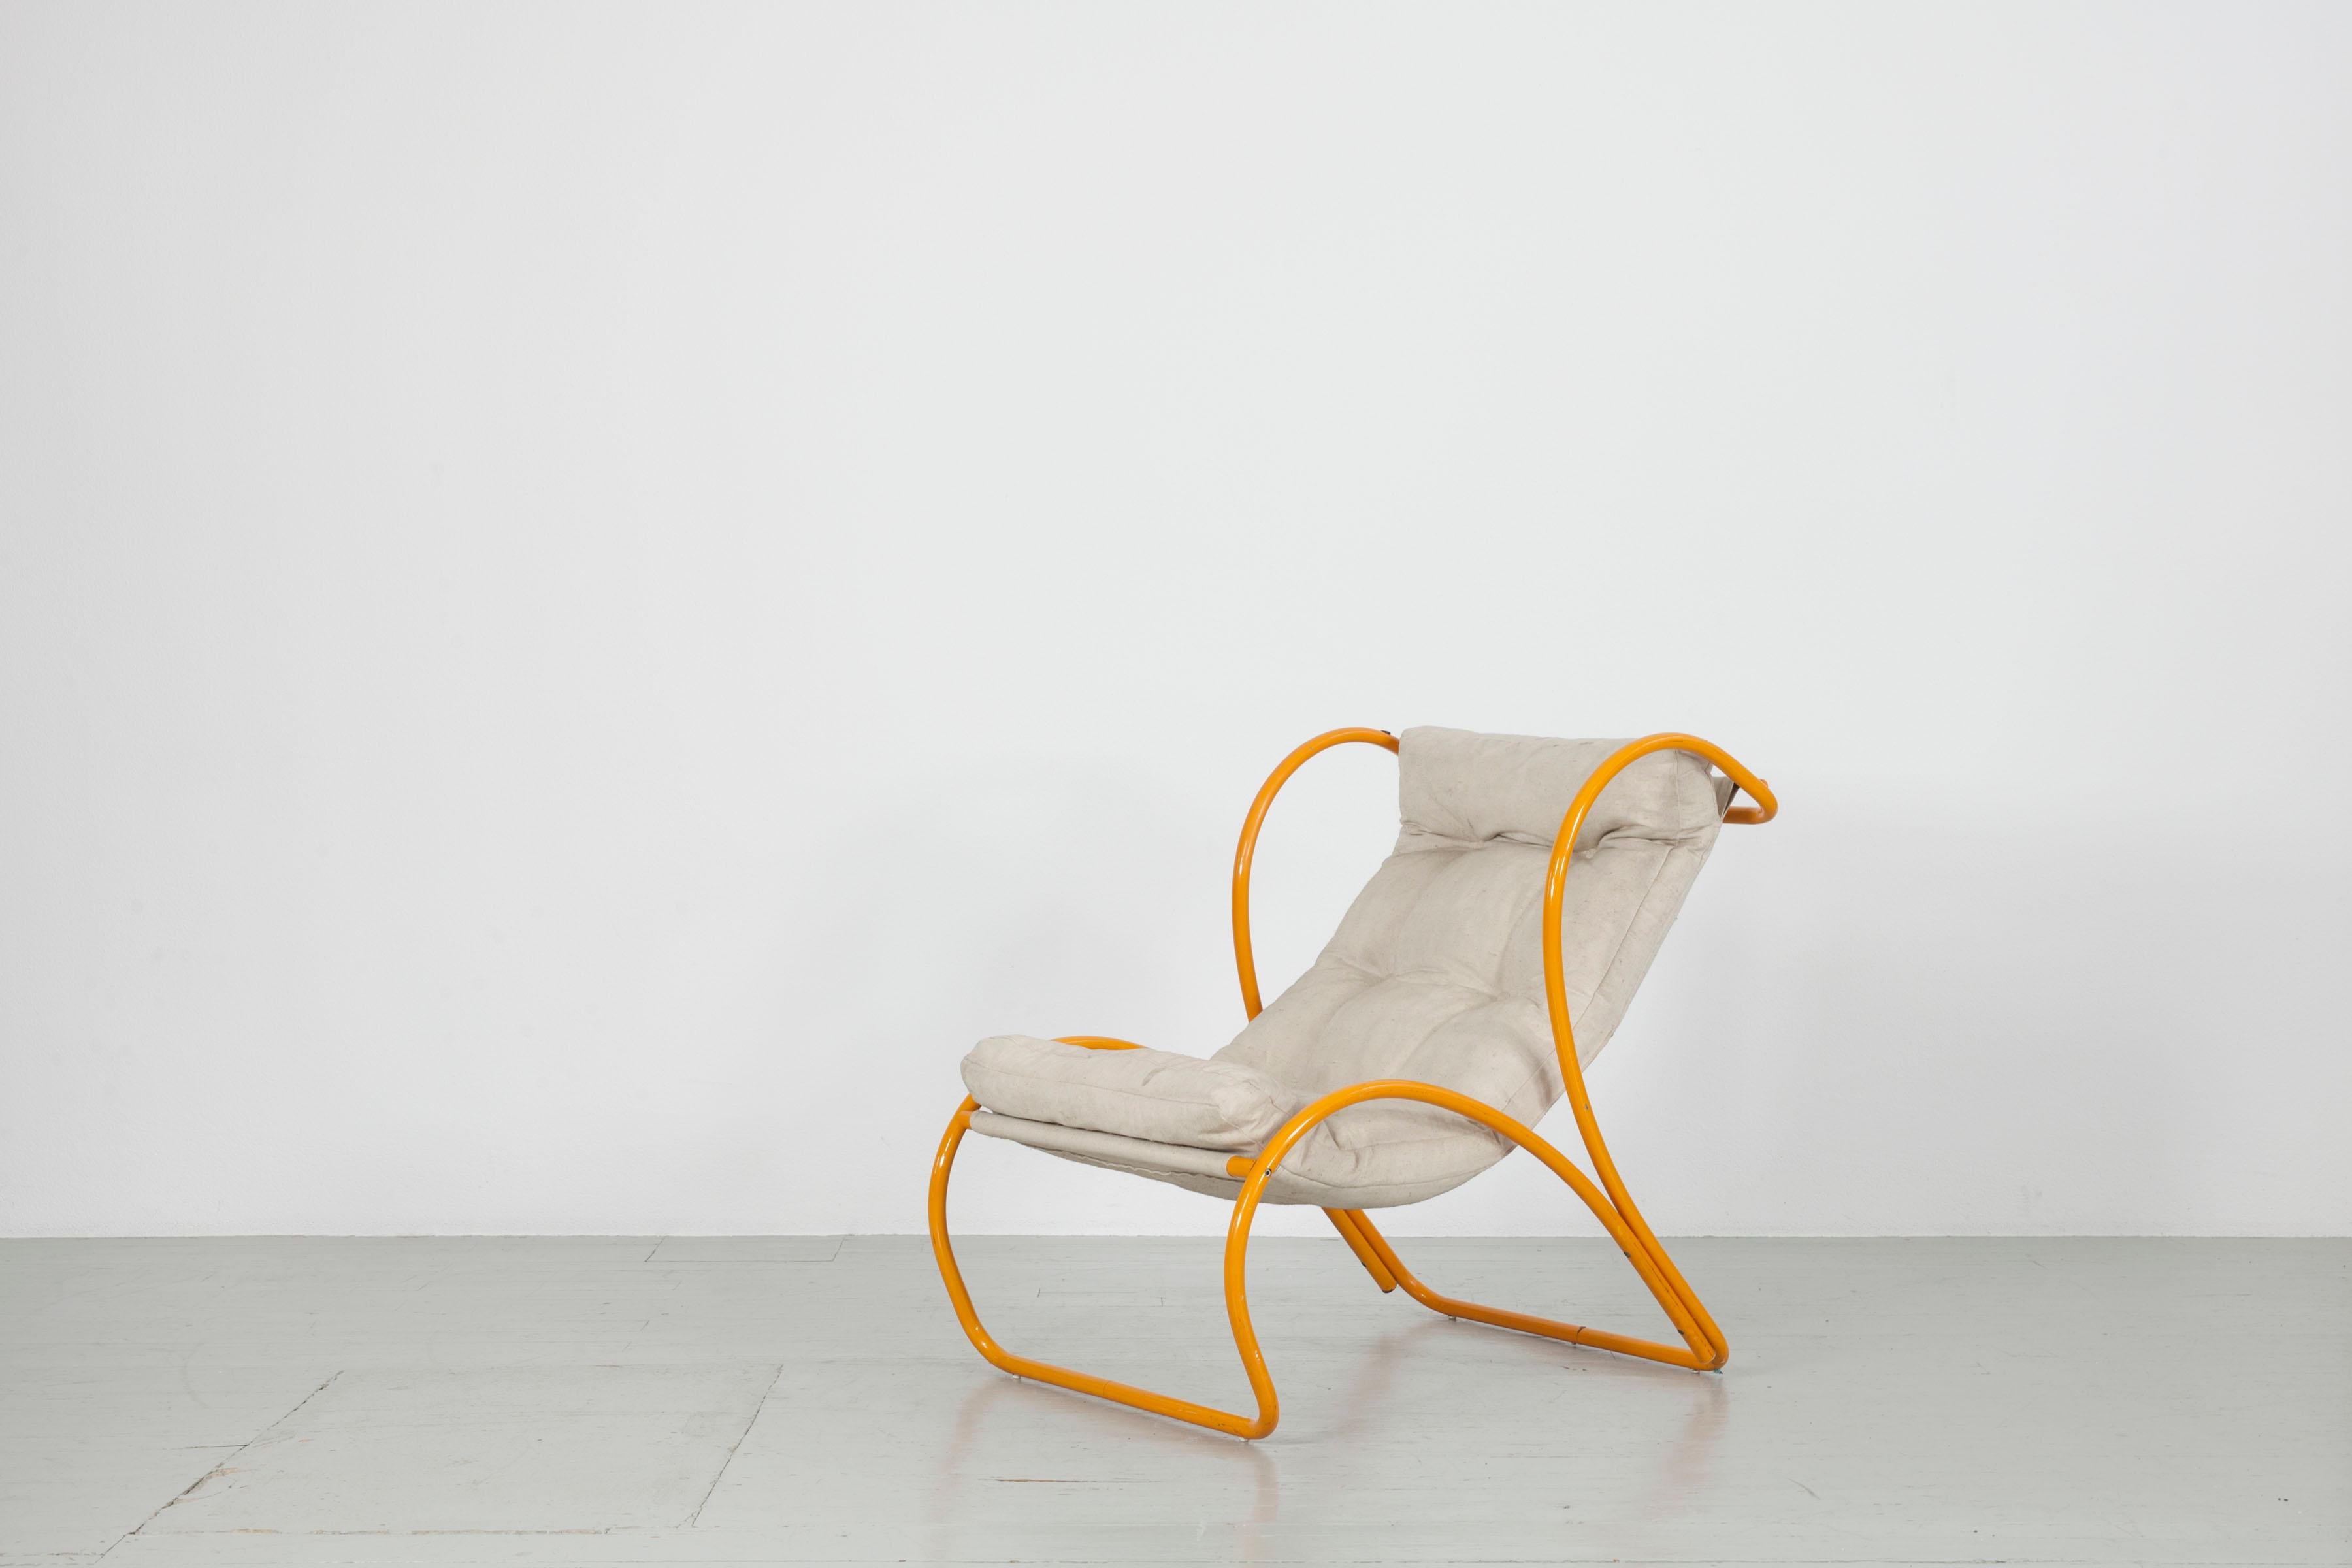 Yellow Armchair in the Manner of Gae Aulenti, Italy, 1960s For Sale 1